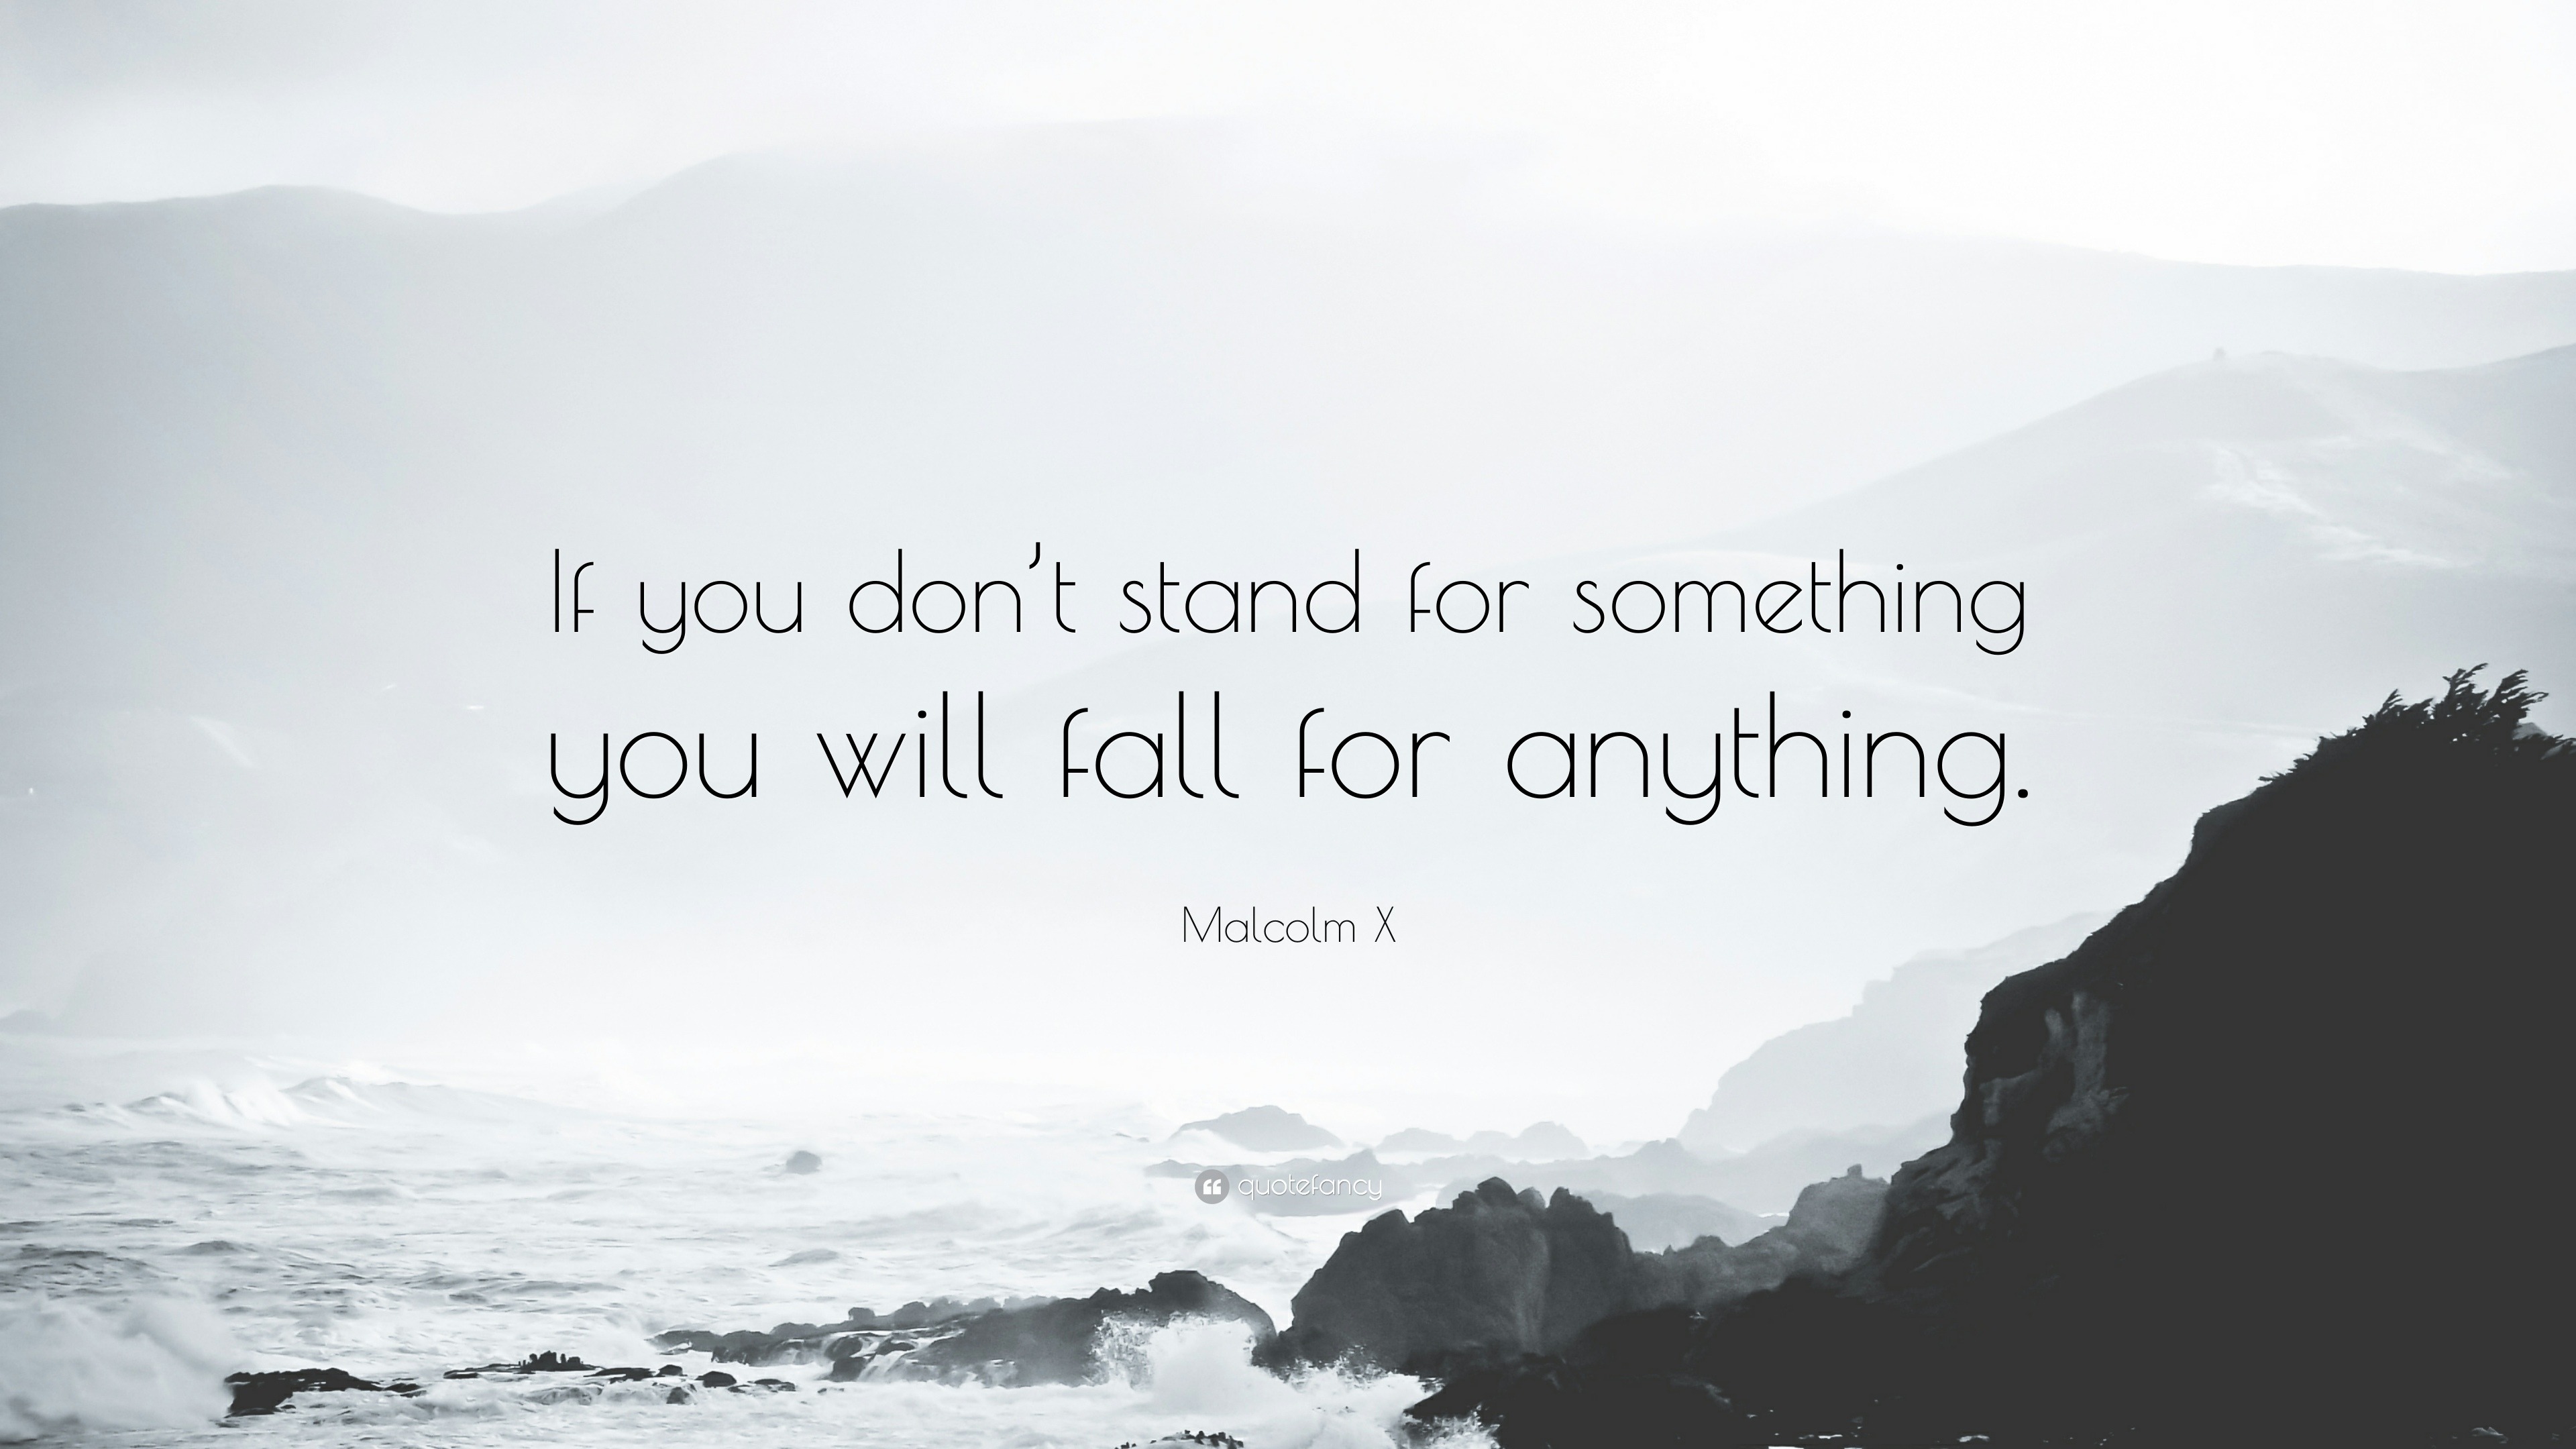 Malcolm X Quote: “If you don’t stand for something you will fall for